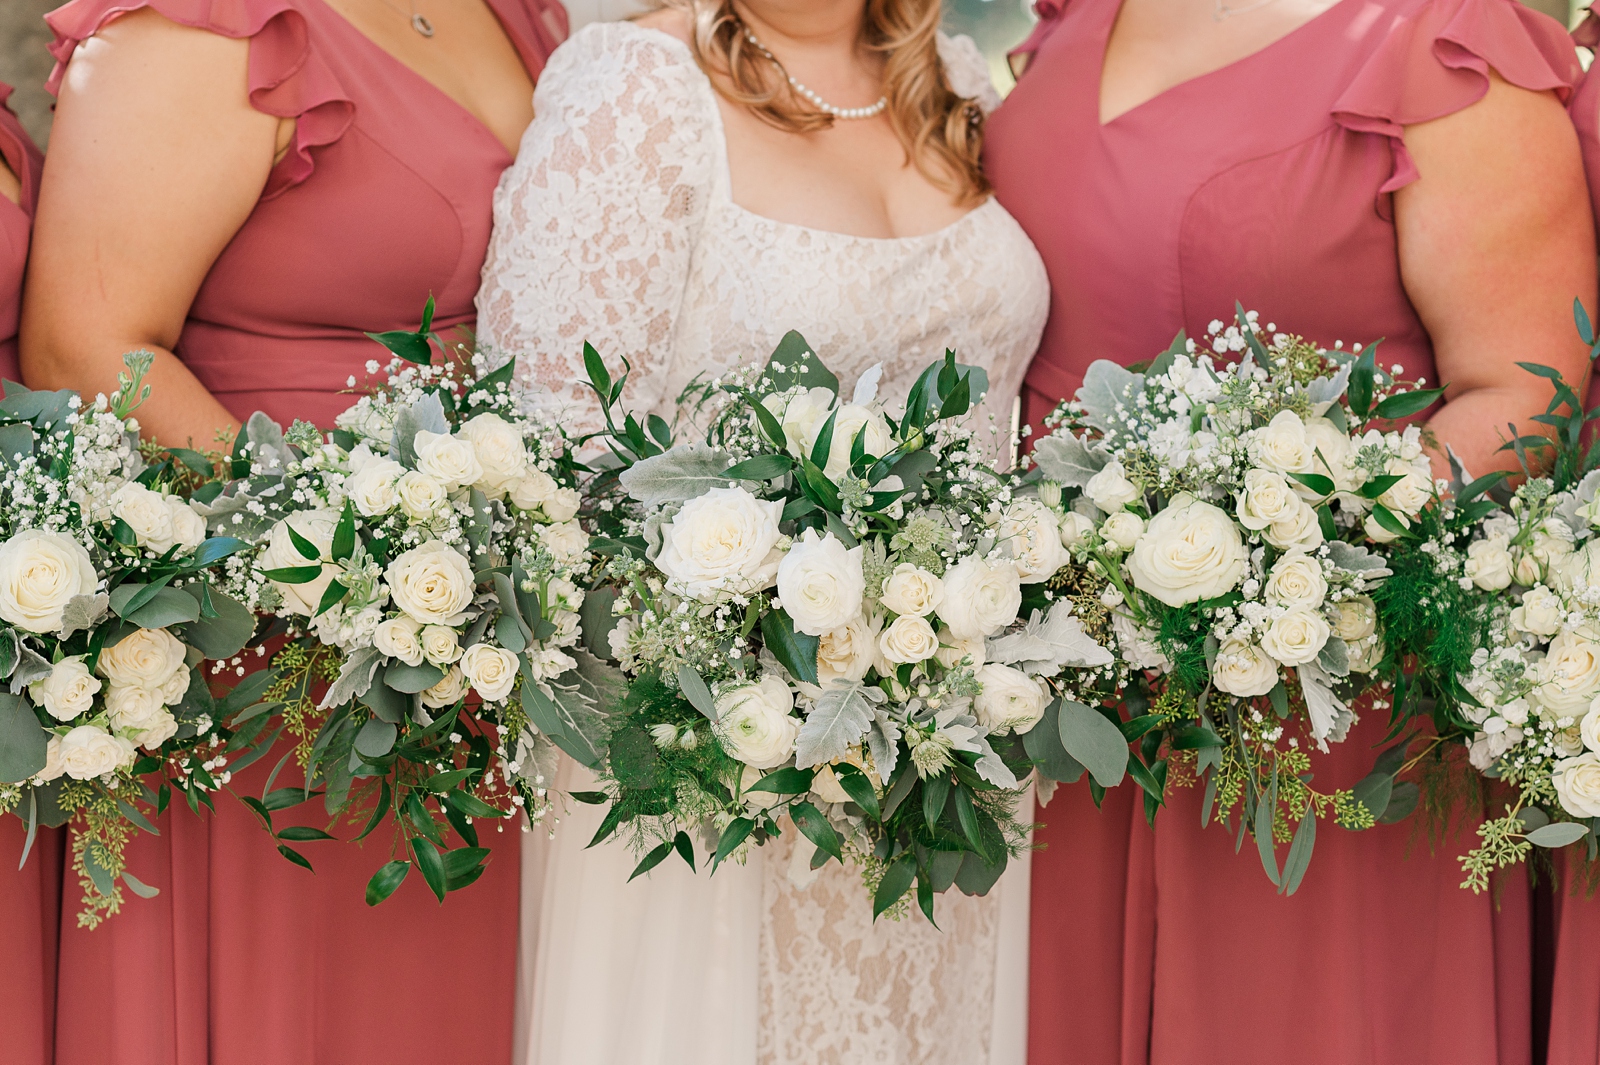 Bridesmaids and Bridal bouquets by Richmond florist Vogue Flowers in Maymont Wedding. Virginia Wedding Photographer Kailey Brianne Photography.